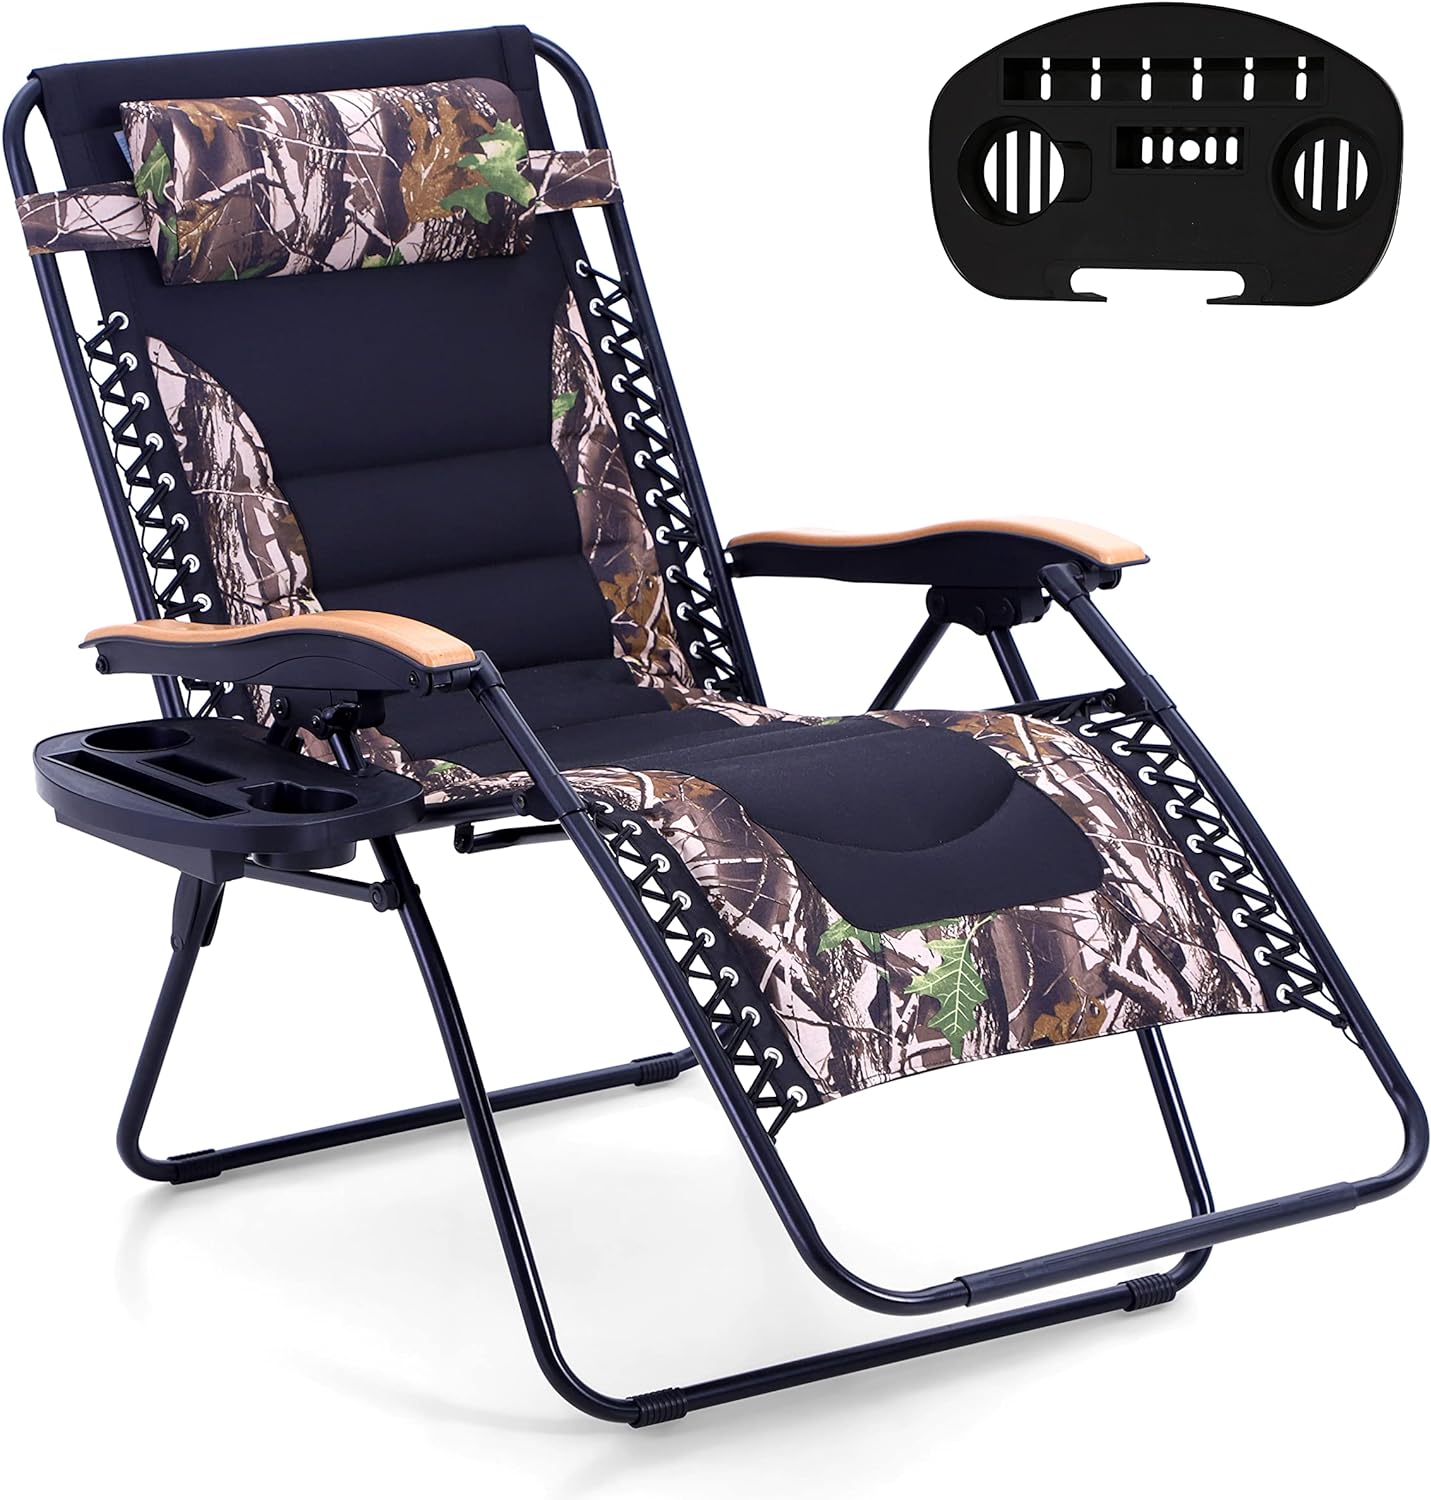 MFSTUDIO Zero Gravity Chairs, Oversized Patio Recliner Chair, Padded Folding Lawn Chair with Cup Holder Tray, Support 400lbs, Camouflage